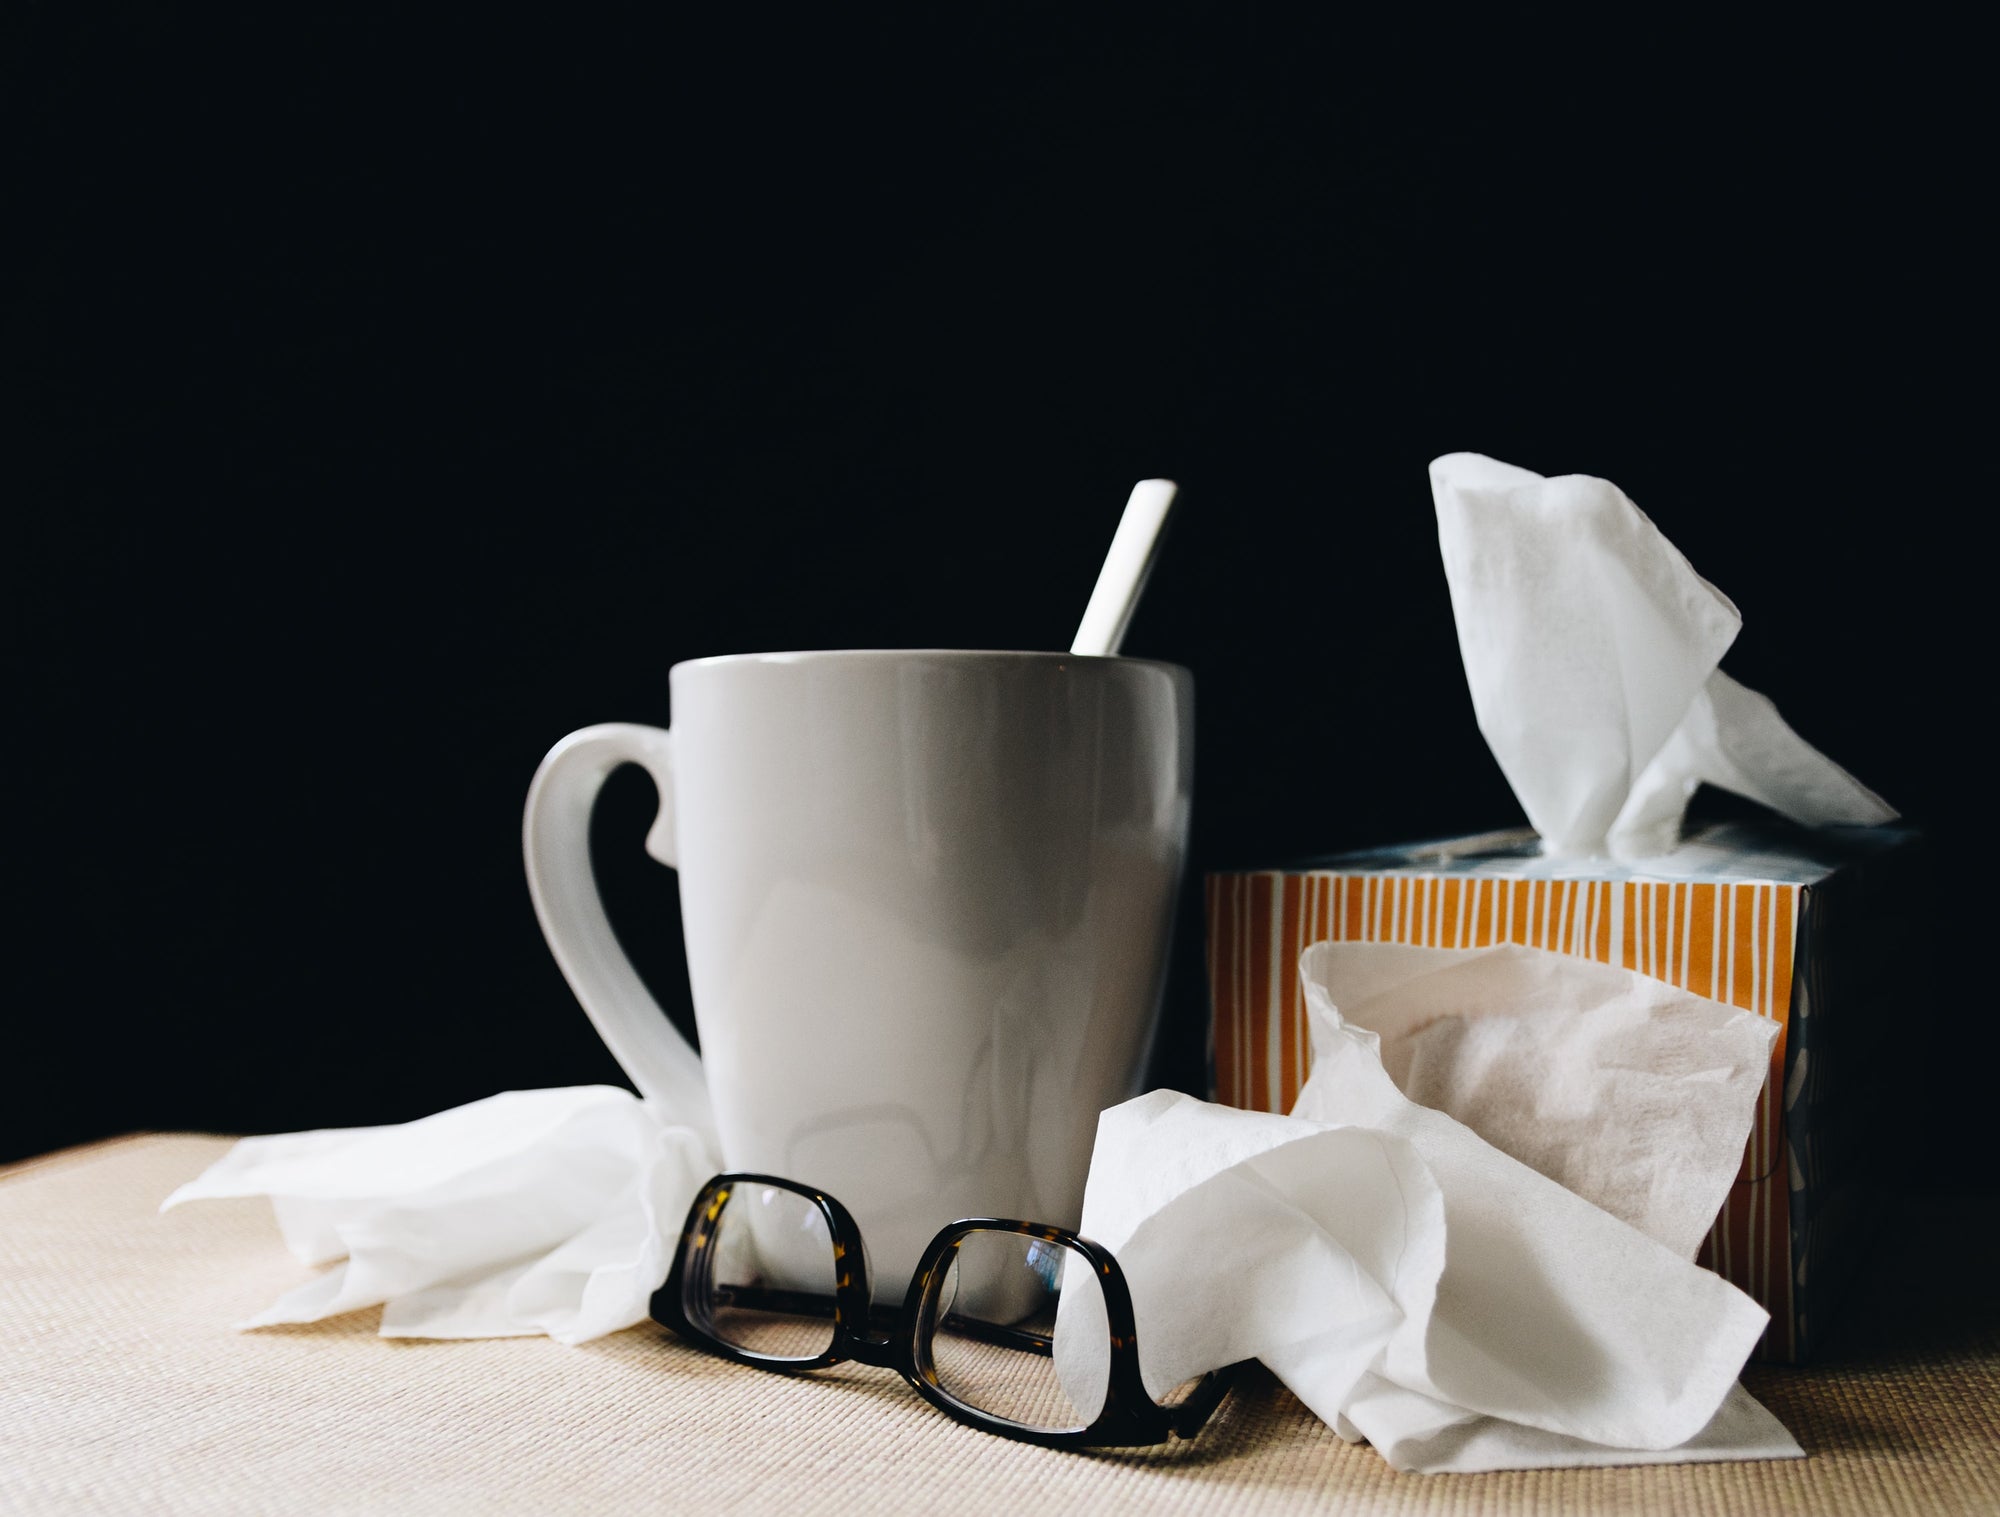 The Flu: How to Protect Yourself and Home